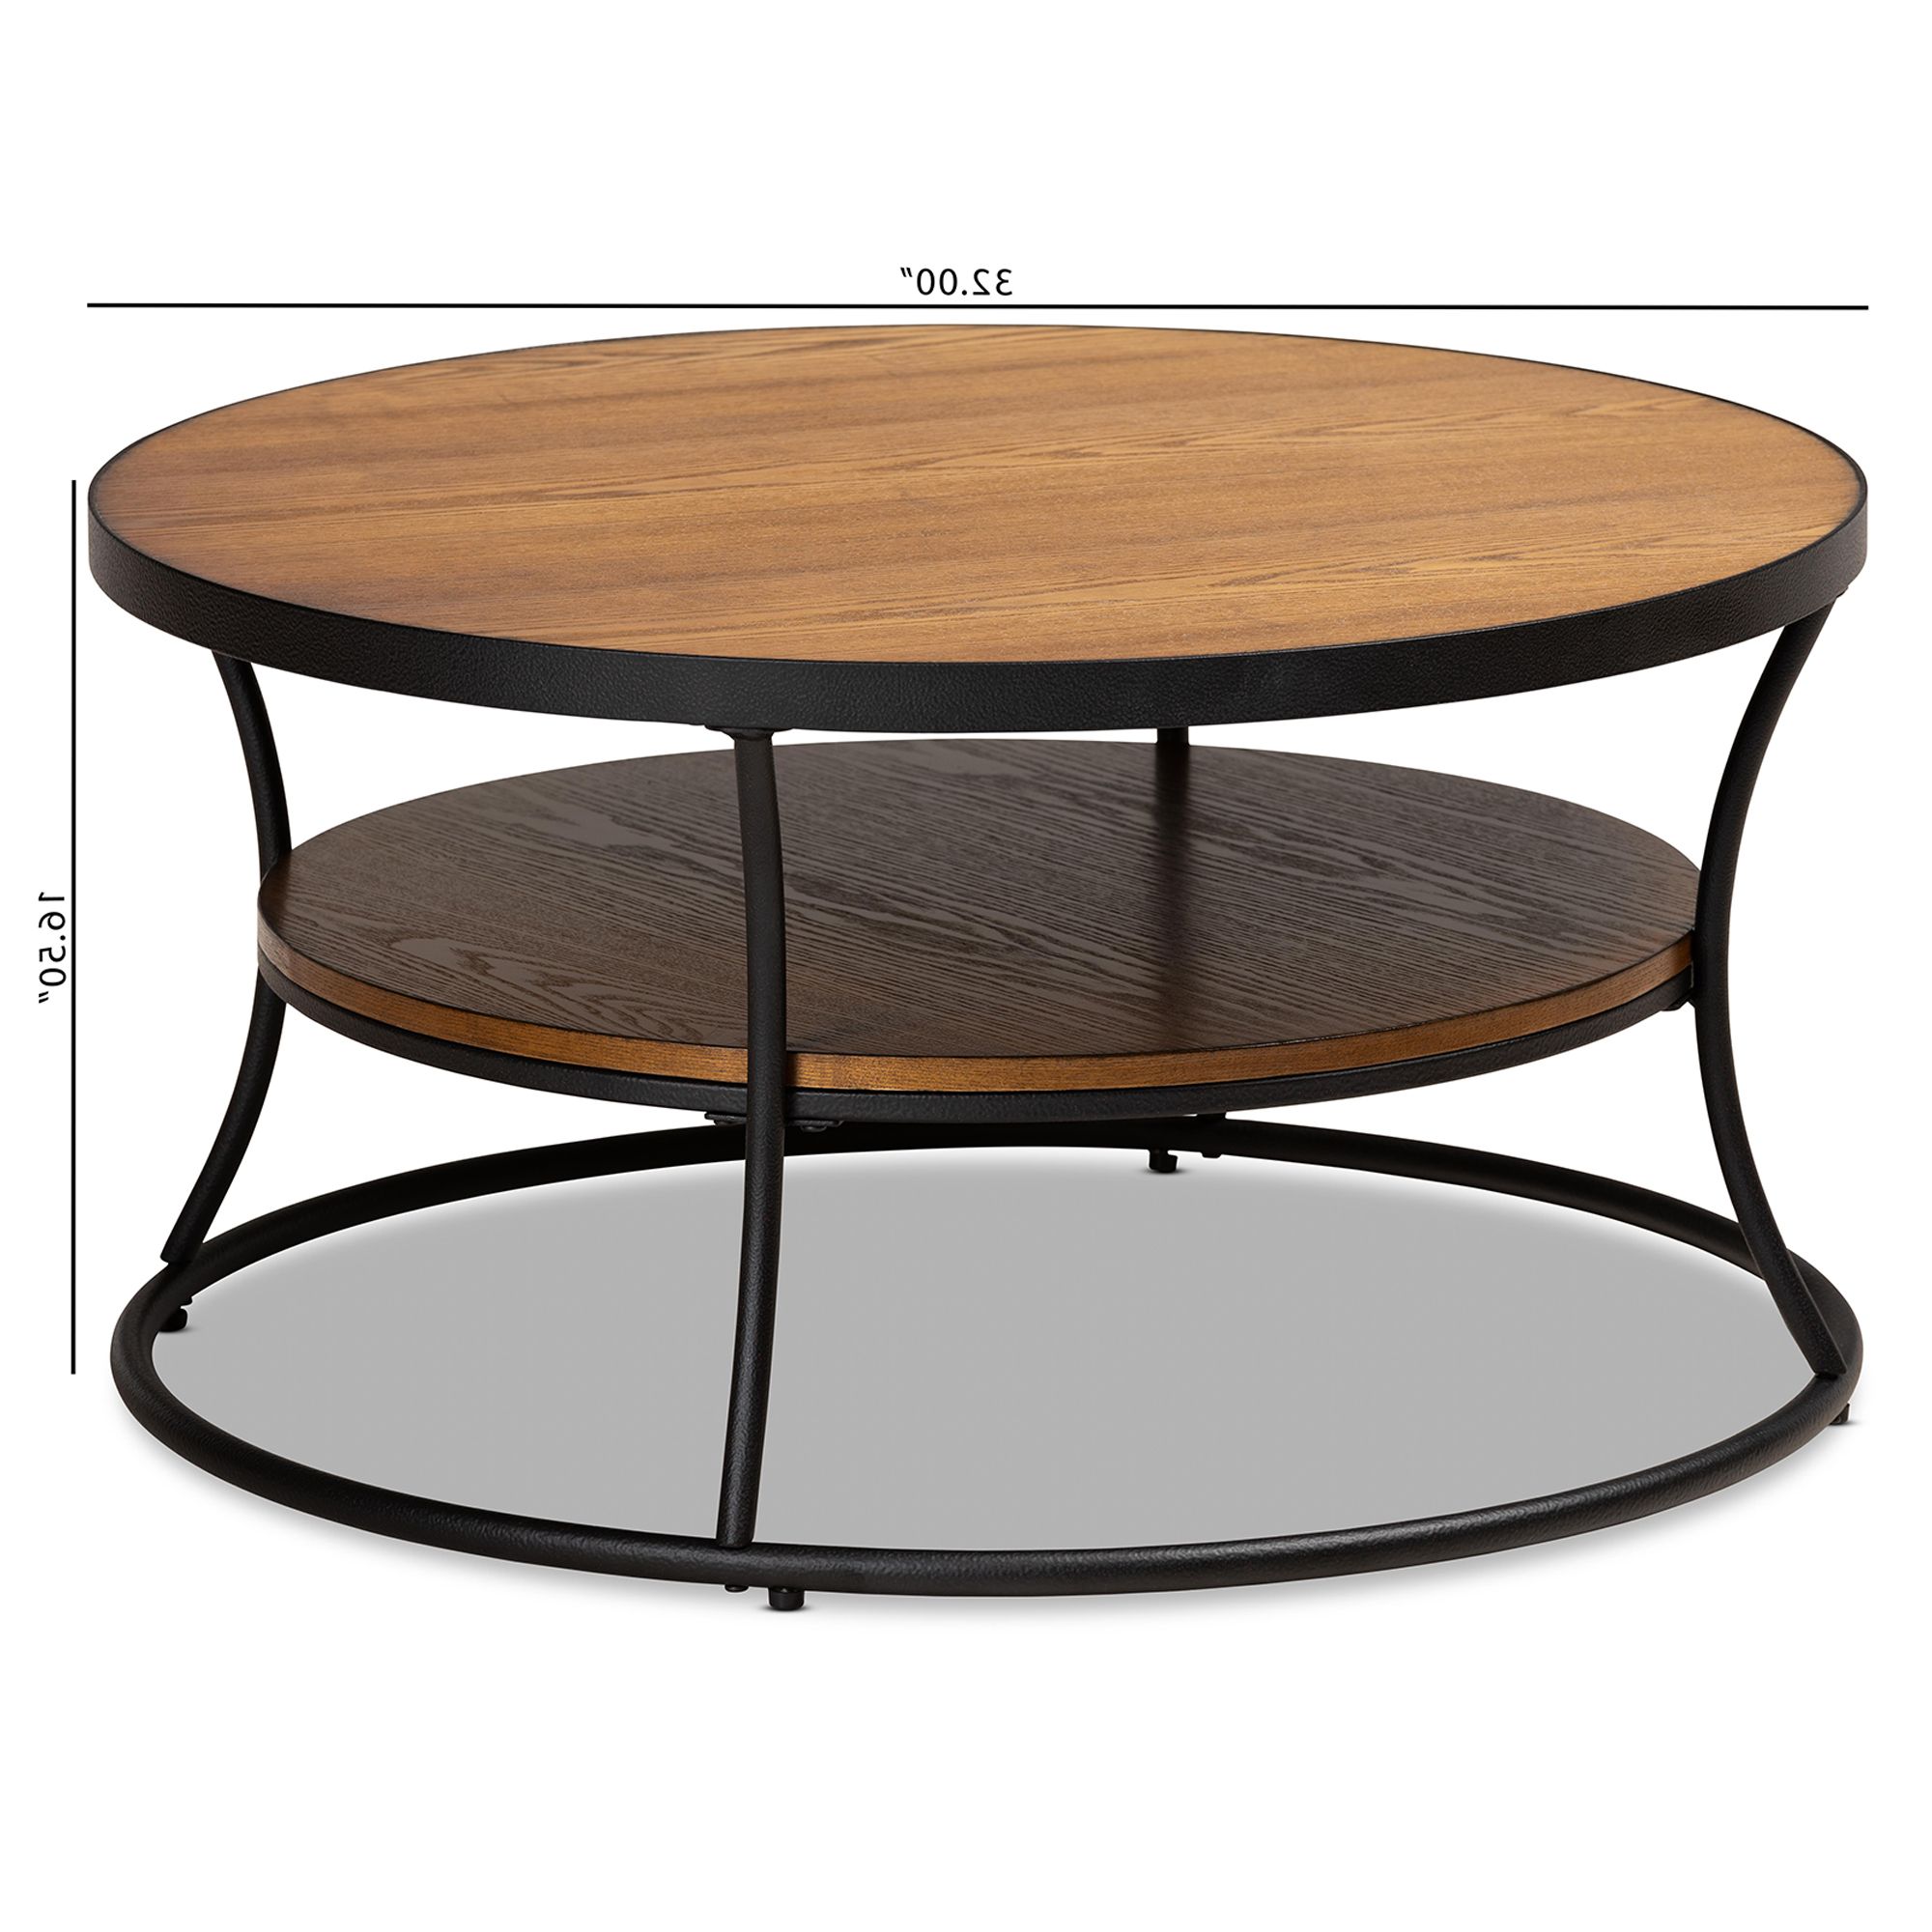 Wholesale Coffee Table| Wholesale Living Room Furniture | Wholesale Inside Metal 1 Shelf Coffee Tables (View 6 of 20)